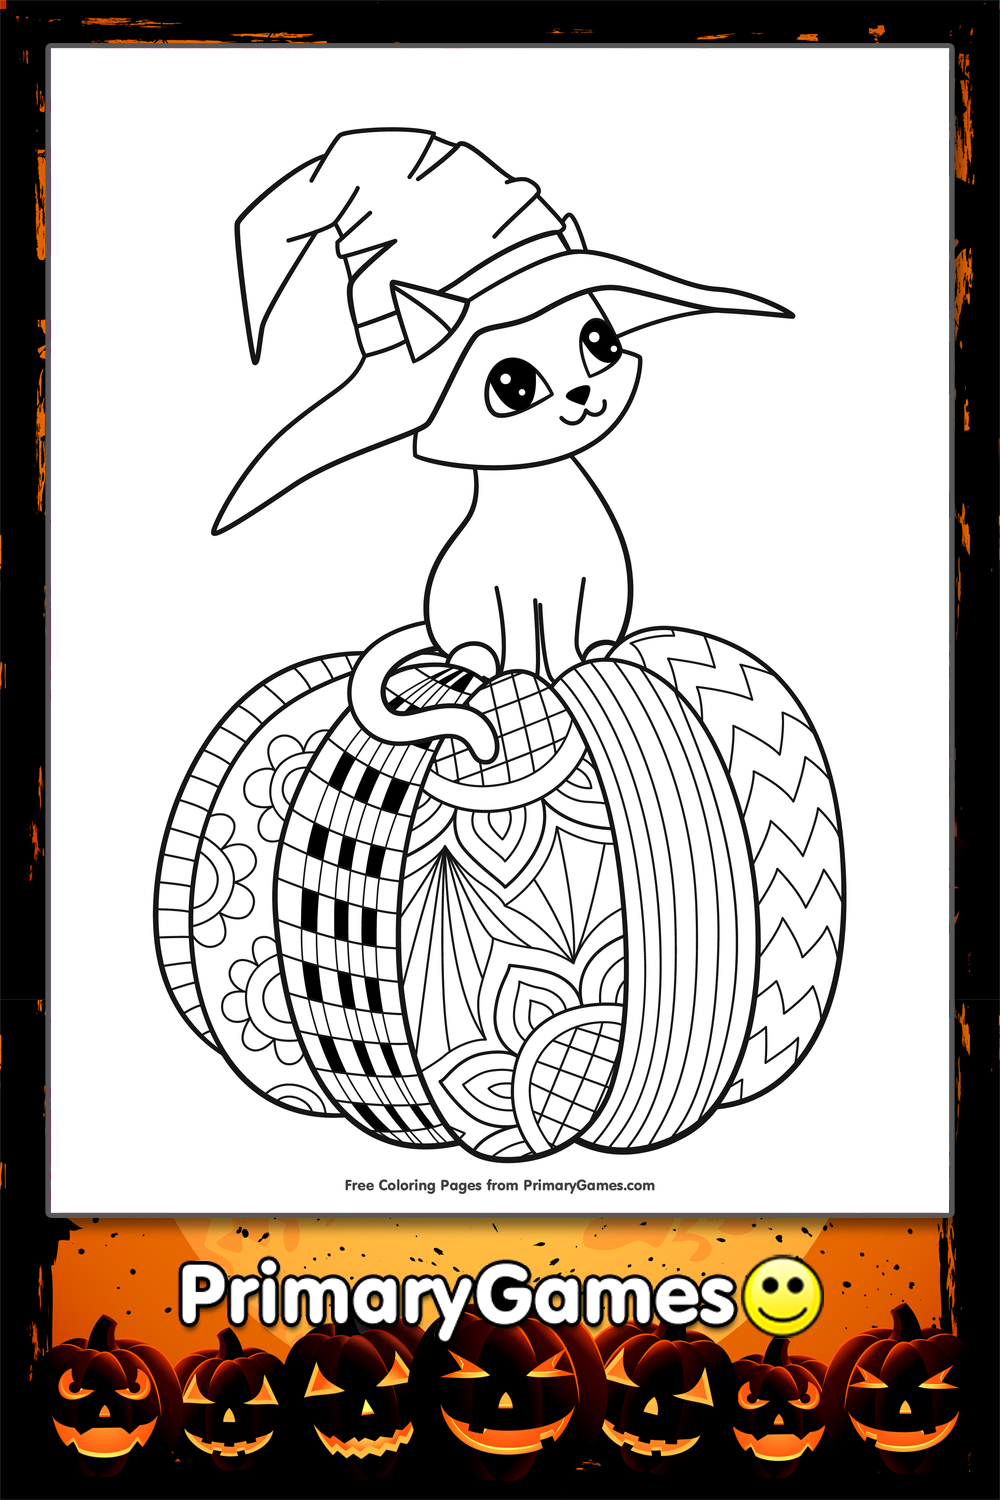 Witch hat cat on pumpkin coloring page â free printable pdf from